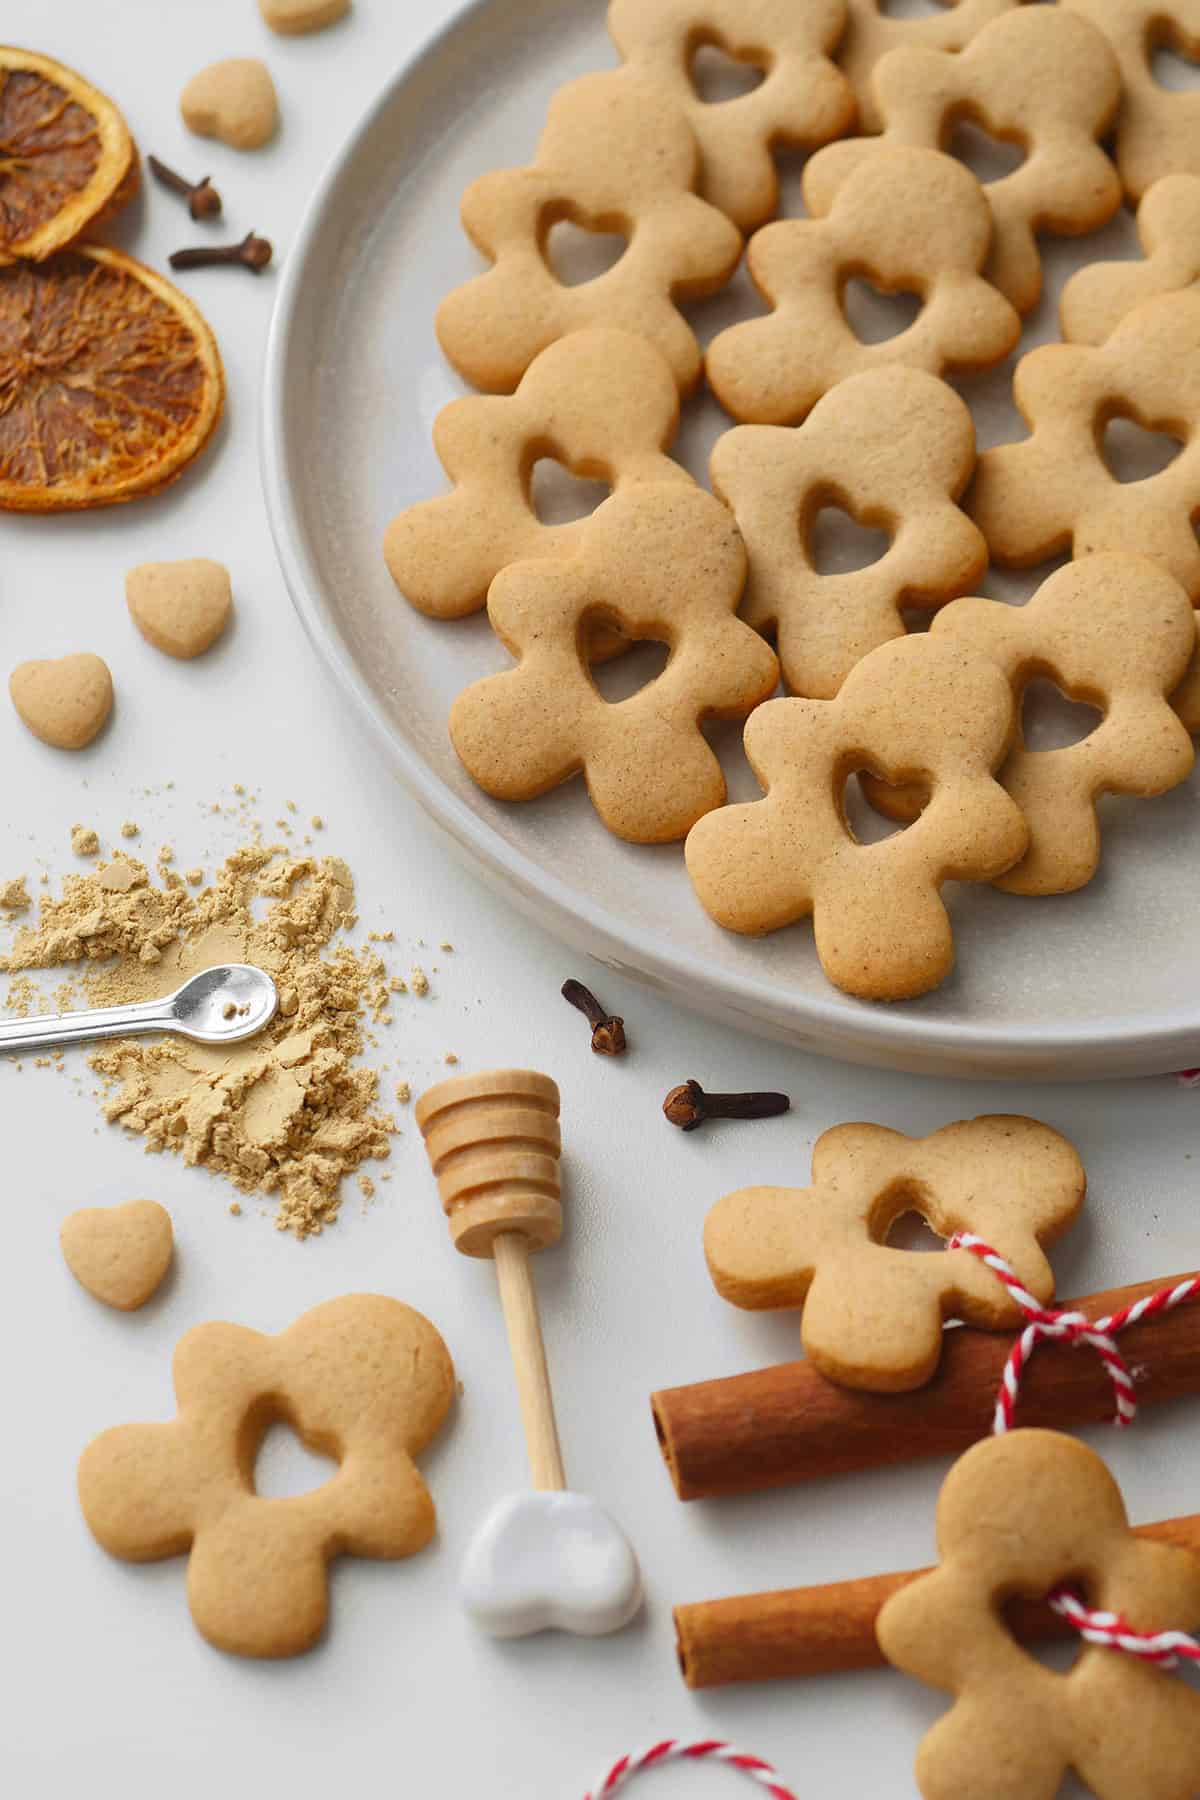 Gingerbread men are on a round plate with festive dried orange slices, honey stick, cinnamon sticks surrounding it. 